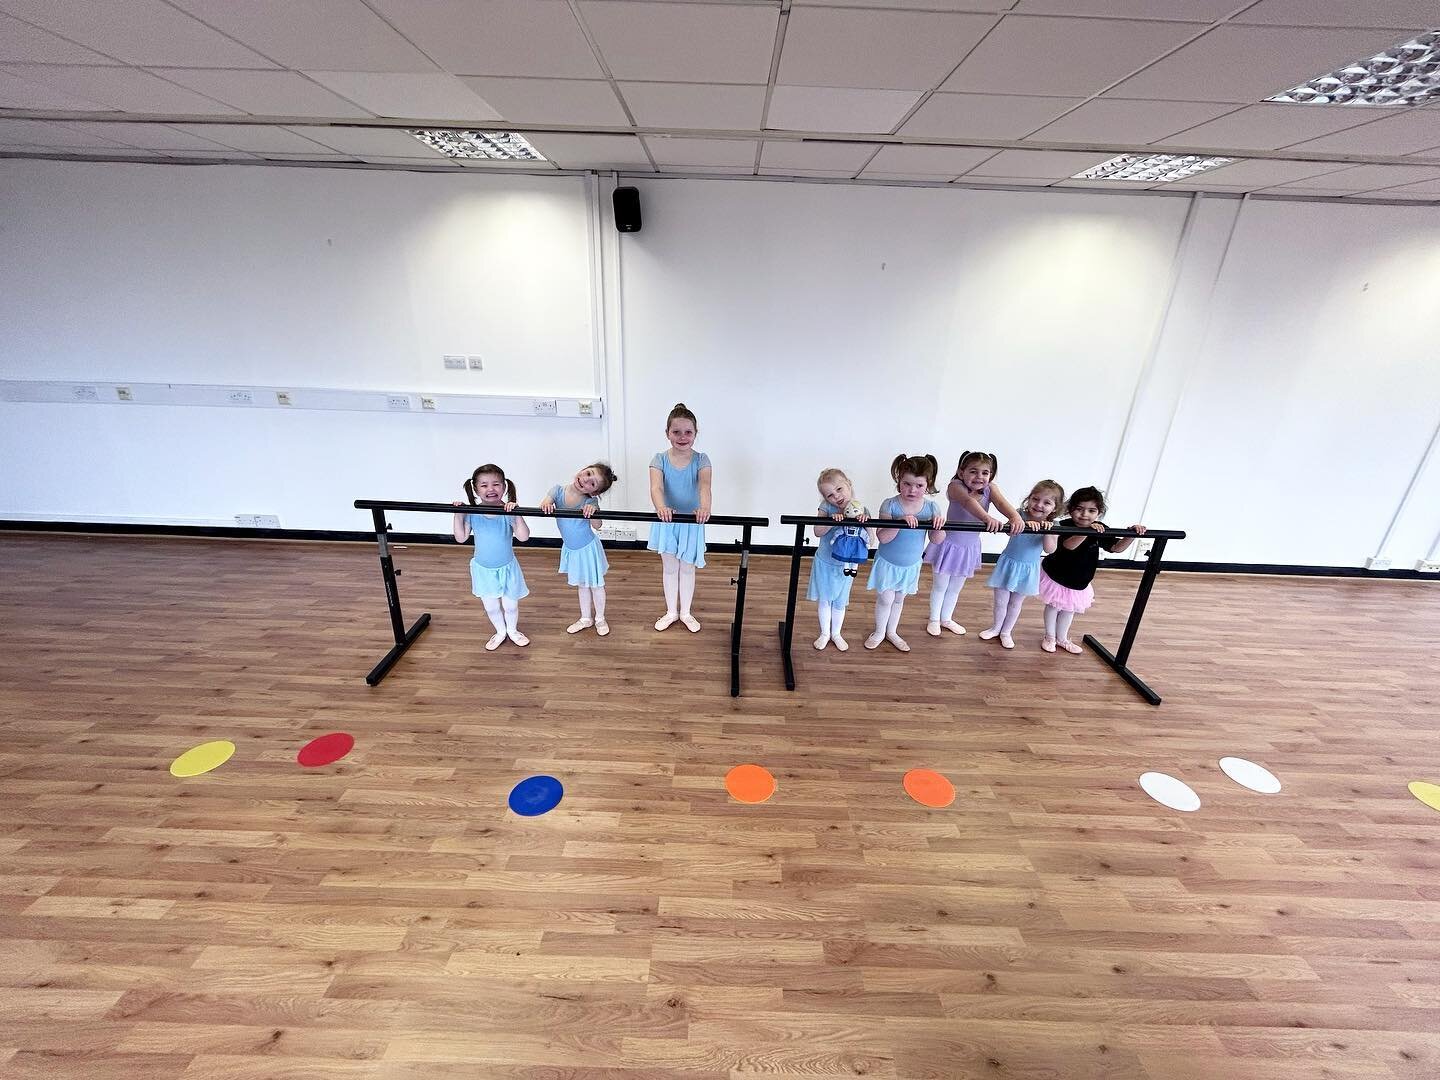 🪺 Happy Easter from LGD School of Dance 🪺 

💙 Can&rsquo;t wait to get back to classes soon! Lots of planning happening. Very excited to start our two brand new classes! Primary modern and grade 2 ballet! 

💙 See you all very soon! 💙